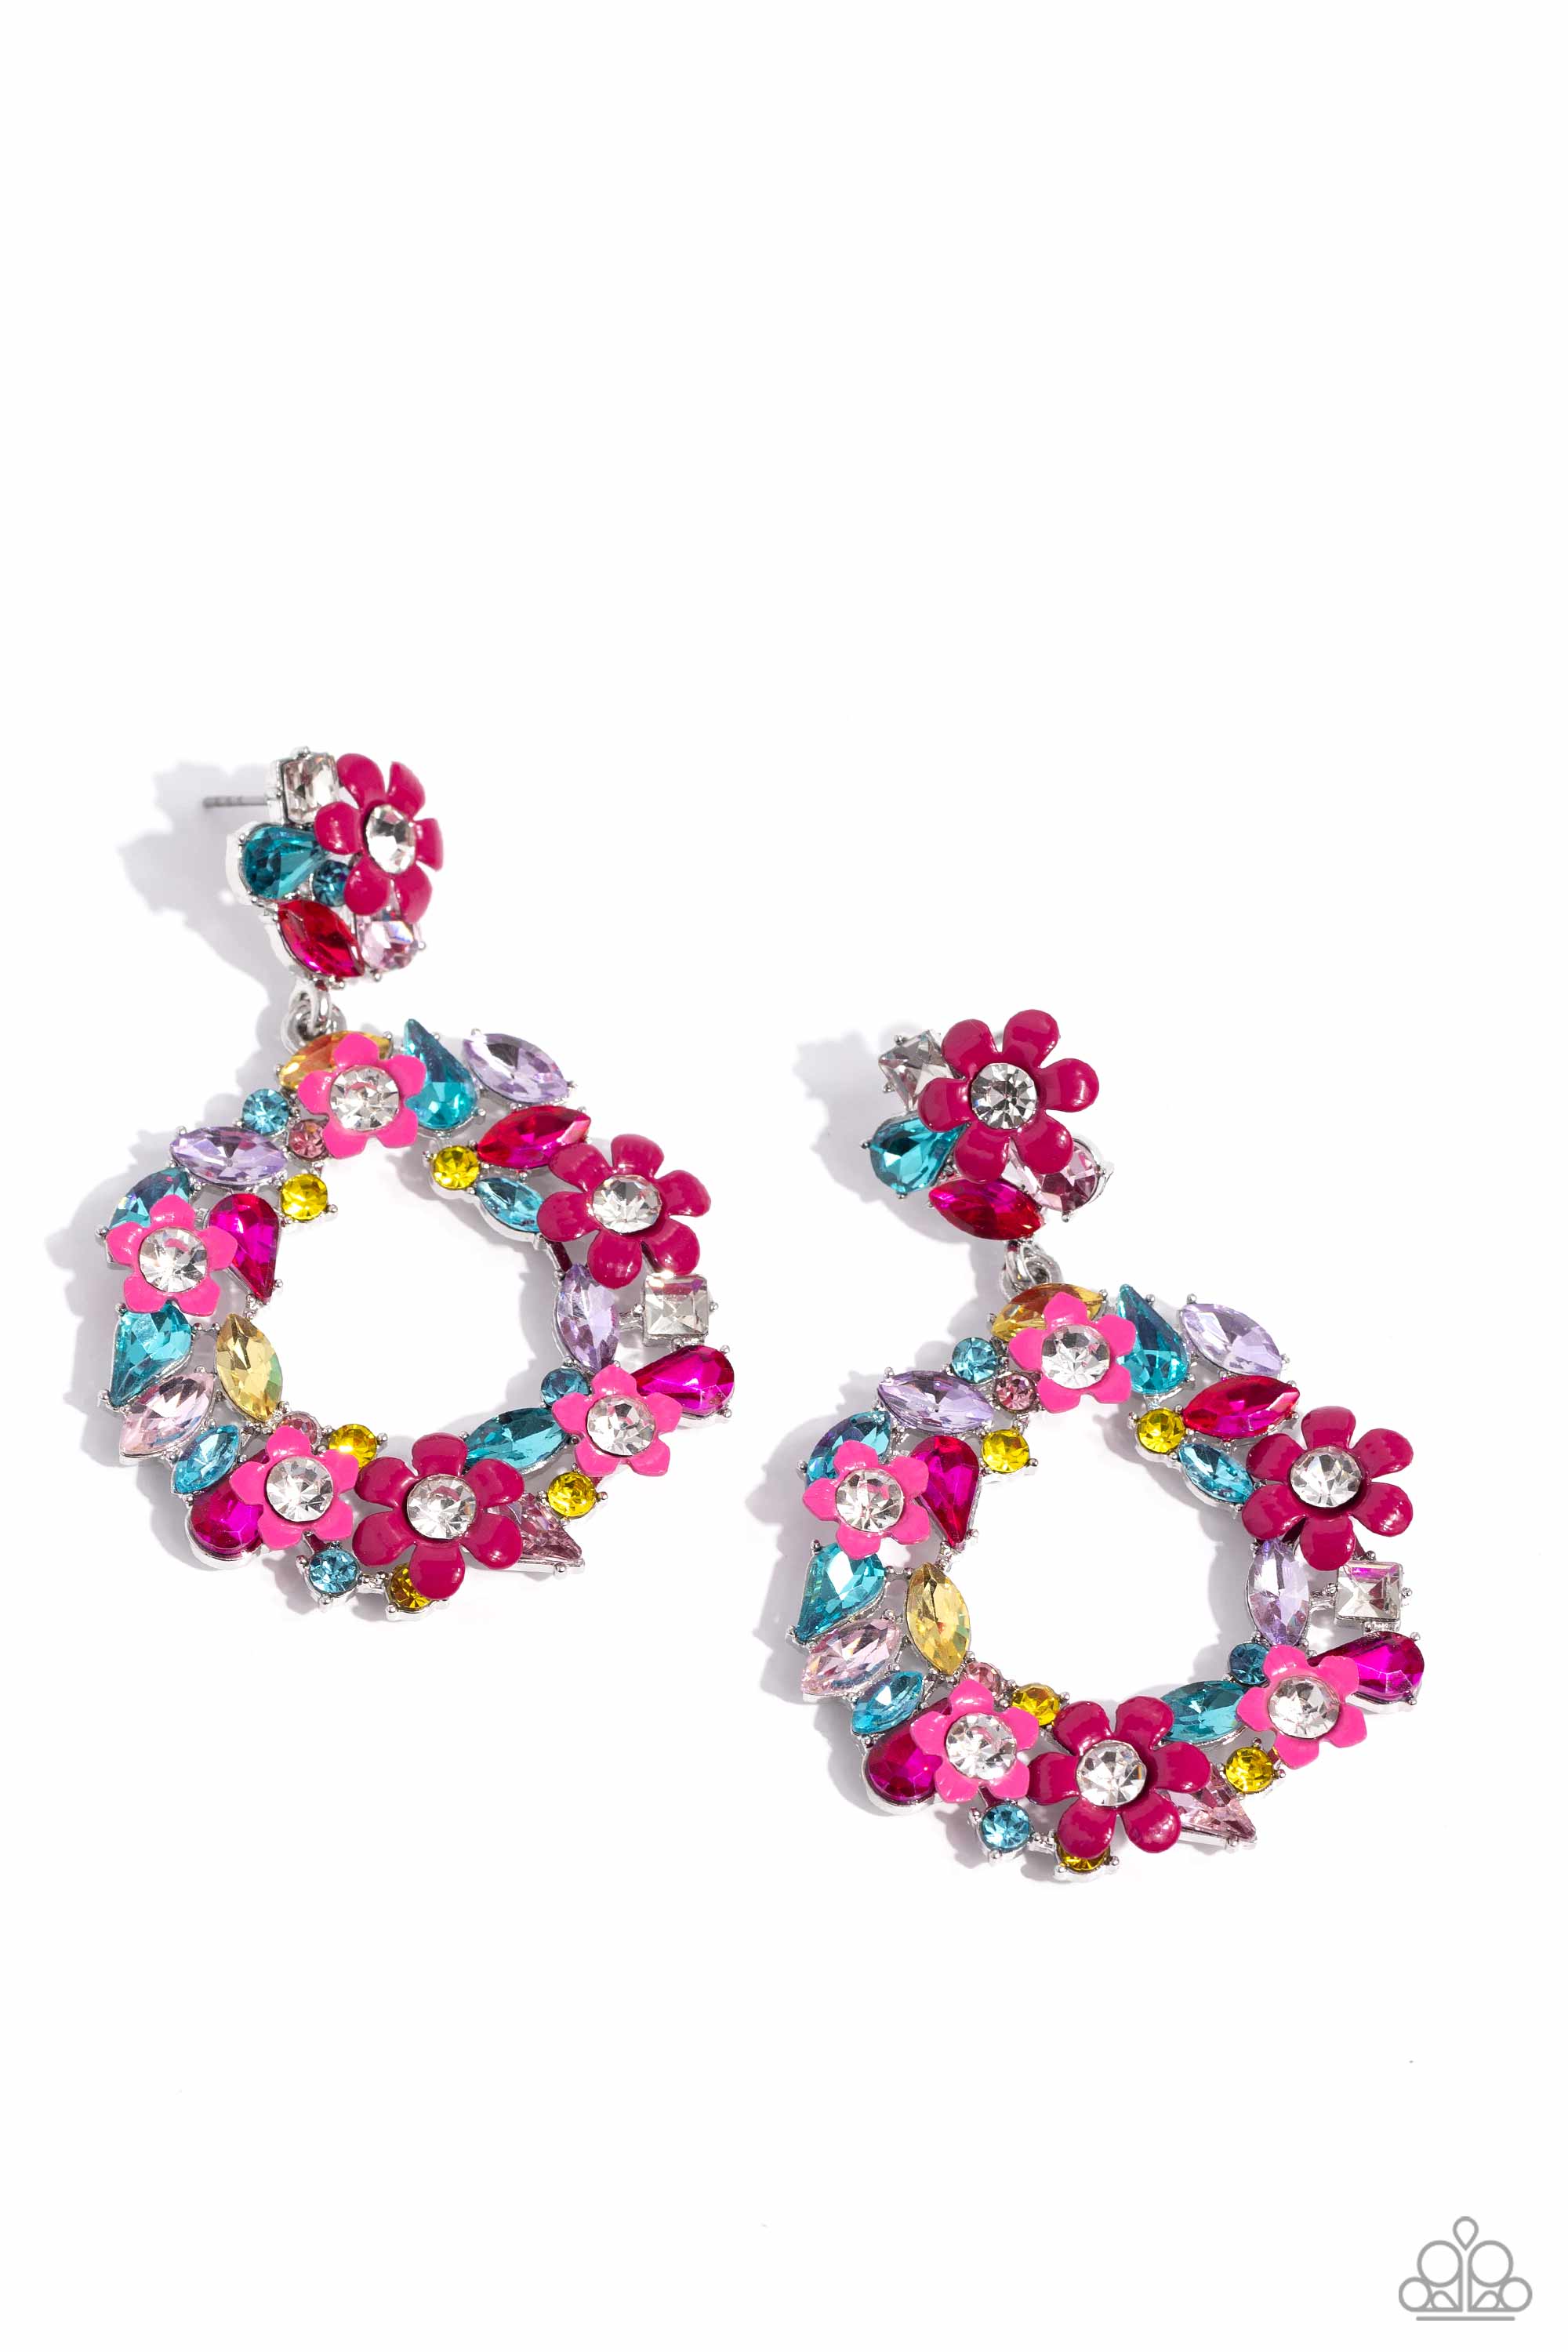 Wreathed in Wildflowers Multi Post Earrings - Paparazzi Accessories- lightbox - CarasShop.com - $5 Jewelry by Cara Jewels